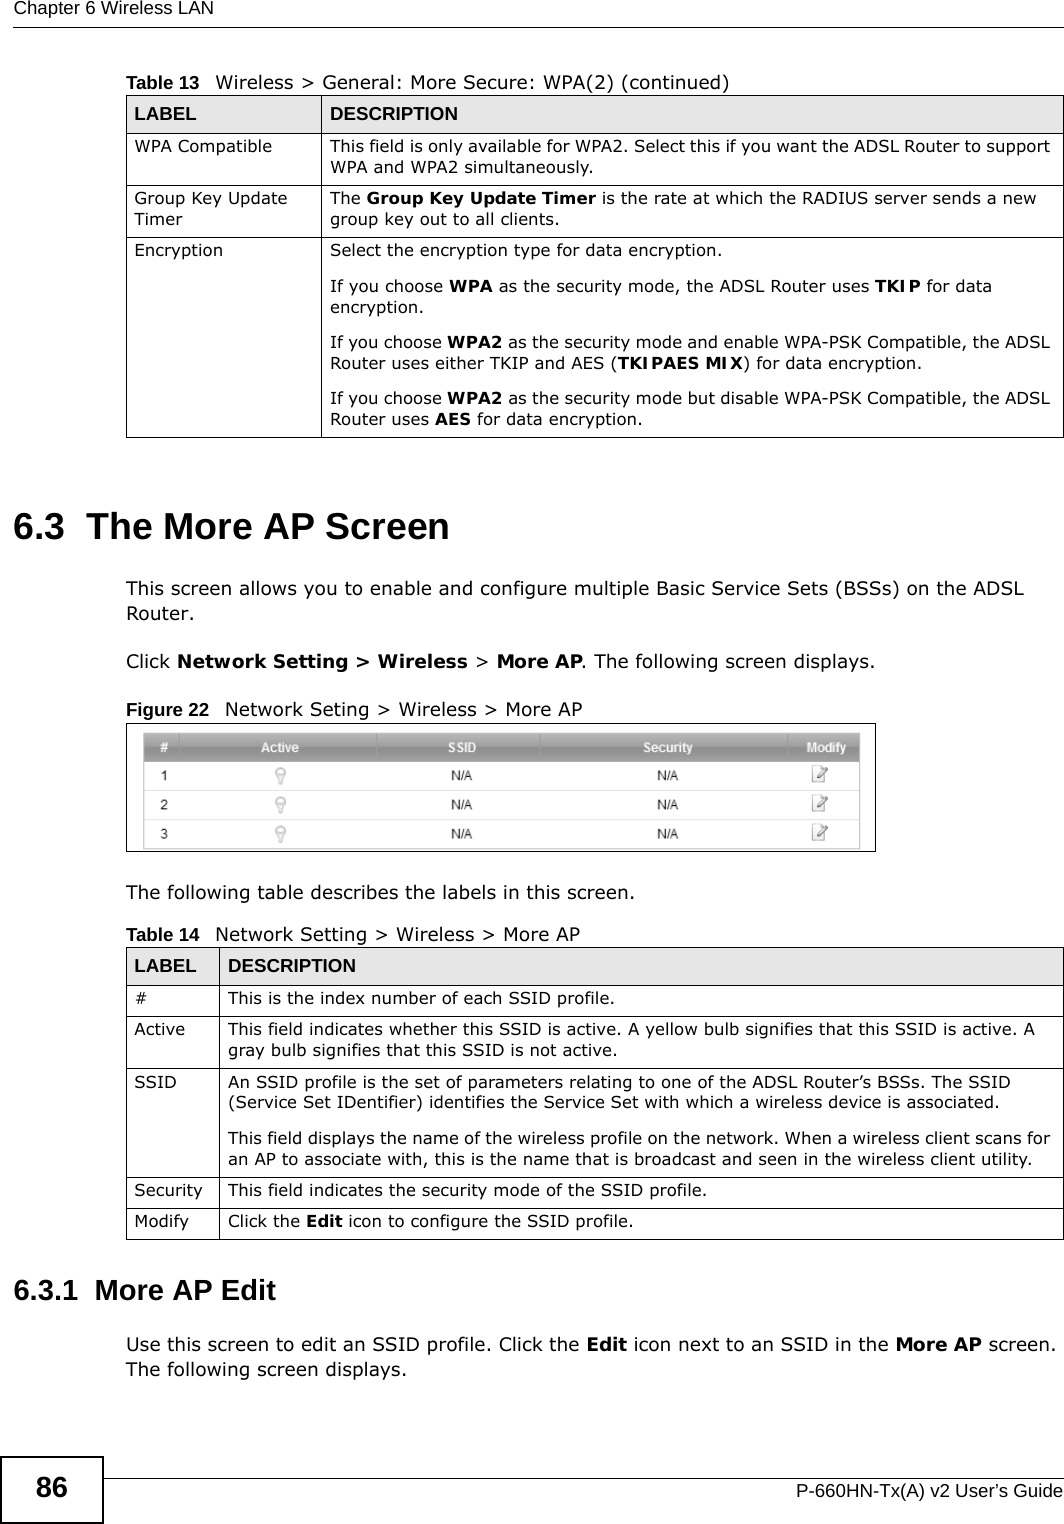 Chapter 6 Wireless LANP-660HN-Tx(A) v2 User’s Guide866.3  The More AP ScreenThis screen allows you to enable and configure multiple Basic Service Sets (BSSs) on the ADSL Router.Click Network Setting &gt; Wireless &gt; More AP. The following screen displays.Figure 22   Network Seting &gt; Wireless &gt; More APThe following table describes the labels in this screen.6.3.1  More AP EditUse this screen to edit an SSID profile. Click the Edit icon next to an SSID in the More AP screen. The following screen displays.WPA Compatible This field is only available for WPA2. Select this if you want the ADSL Router to support WPA and WPA2 simultaneously.Group Key Update TimerThe Group Key Update Timer is the rate at which the RADIUS server sends a new group key out to all clients. Encryption Select the encryption type for data encryption.If you choose WPA as the security mode, the ADSL Router uses TKIP for data encryption.If you choose WPA2 as the security mode and enable WPA-PSK Compatible, the ADSL Router uses either TKIP and AES (TKIPAES MIX) for data encryption.If you choose WPA2 as the security mode but disable WPA-PSK Compatible, the ADSL Router uses AES for data encryption.Table 13   Wireless &gt; General: More Secure: WPA(2) (continued)LABEL DESCRIPTIONTable 14   Network Setting &gt; Wireless &gt; More APLABEL DESCRIPTION# This is the index number of each SSID profile. Active This field indicates whether this SSID is active. A yellow bulb signifies that this SSID is active. A gray bulb signifies that this SSID is not active.SSID An SSID profile is the set of parameters relating to one of the ADSL Router’s BSSs. The SSID (Service Set IDentifier) identifies the Service Set with which a wireless device is associated. This field displays the name of the wireless profile on the network. When a wireless client scans for an AP to associate with, this is the name that is broadcast and seen in the wireless client utility.Security This field indicates the security mode of the SSID profile.Modify Click the Edit icon to configure the SSID profile.